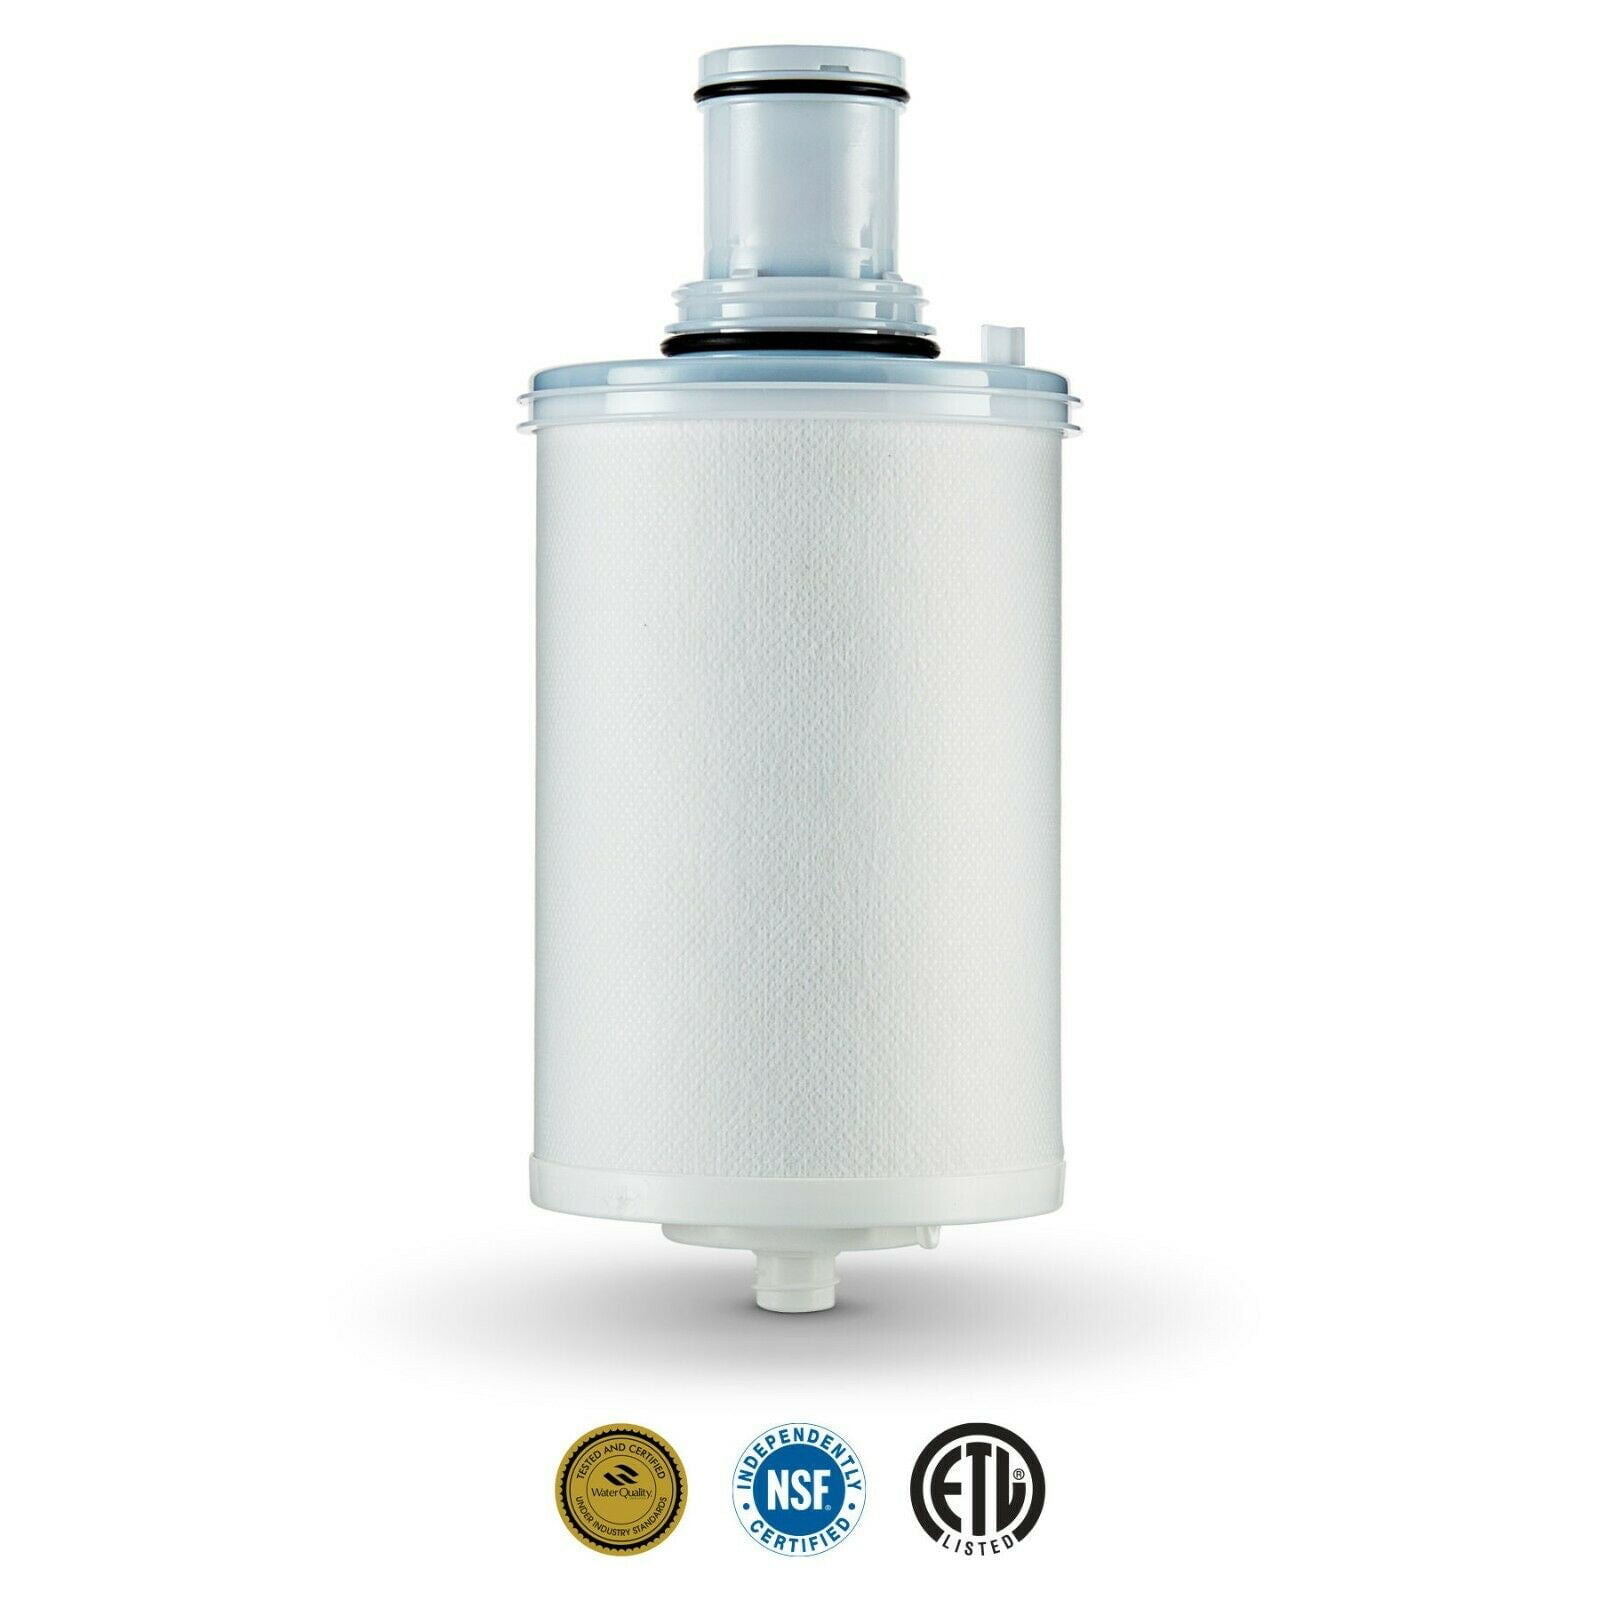 eSpring Replacement Filter Cartridge UV Technology 100186 ***EXPEDITED  SHIPPING to ALL OVER THE WORLD***